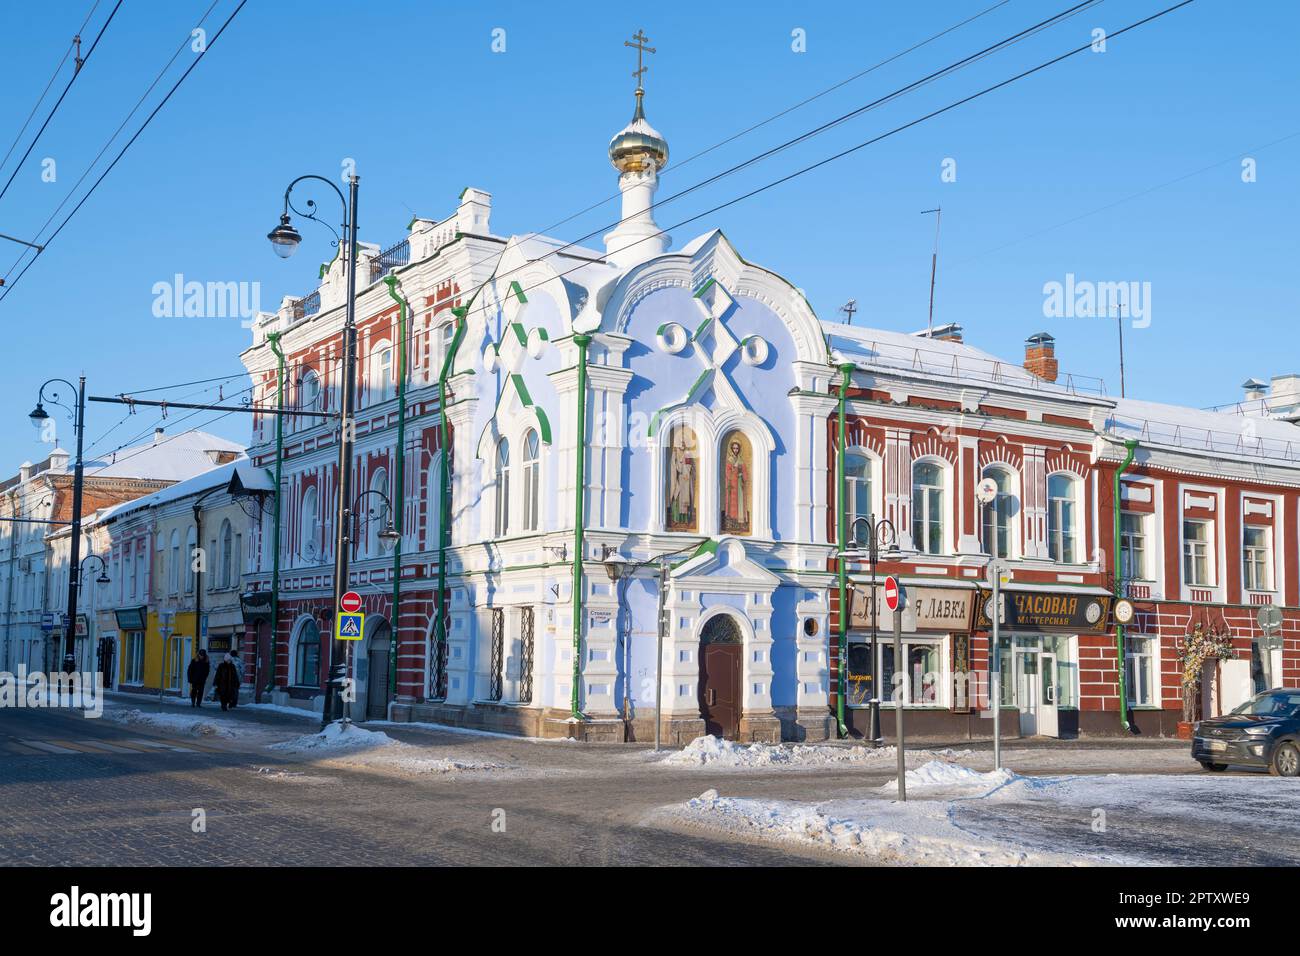 RYBINSK, RUSSIA - JANUARY 06, 2023: Ancient house church of St. Nicholas the Wonderworker in the city landscape on a January day Stock Photo